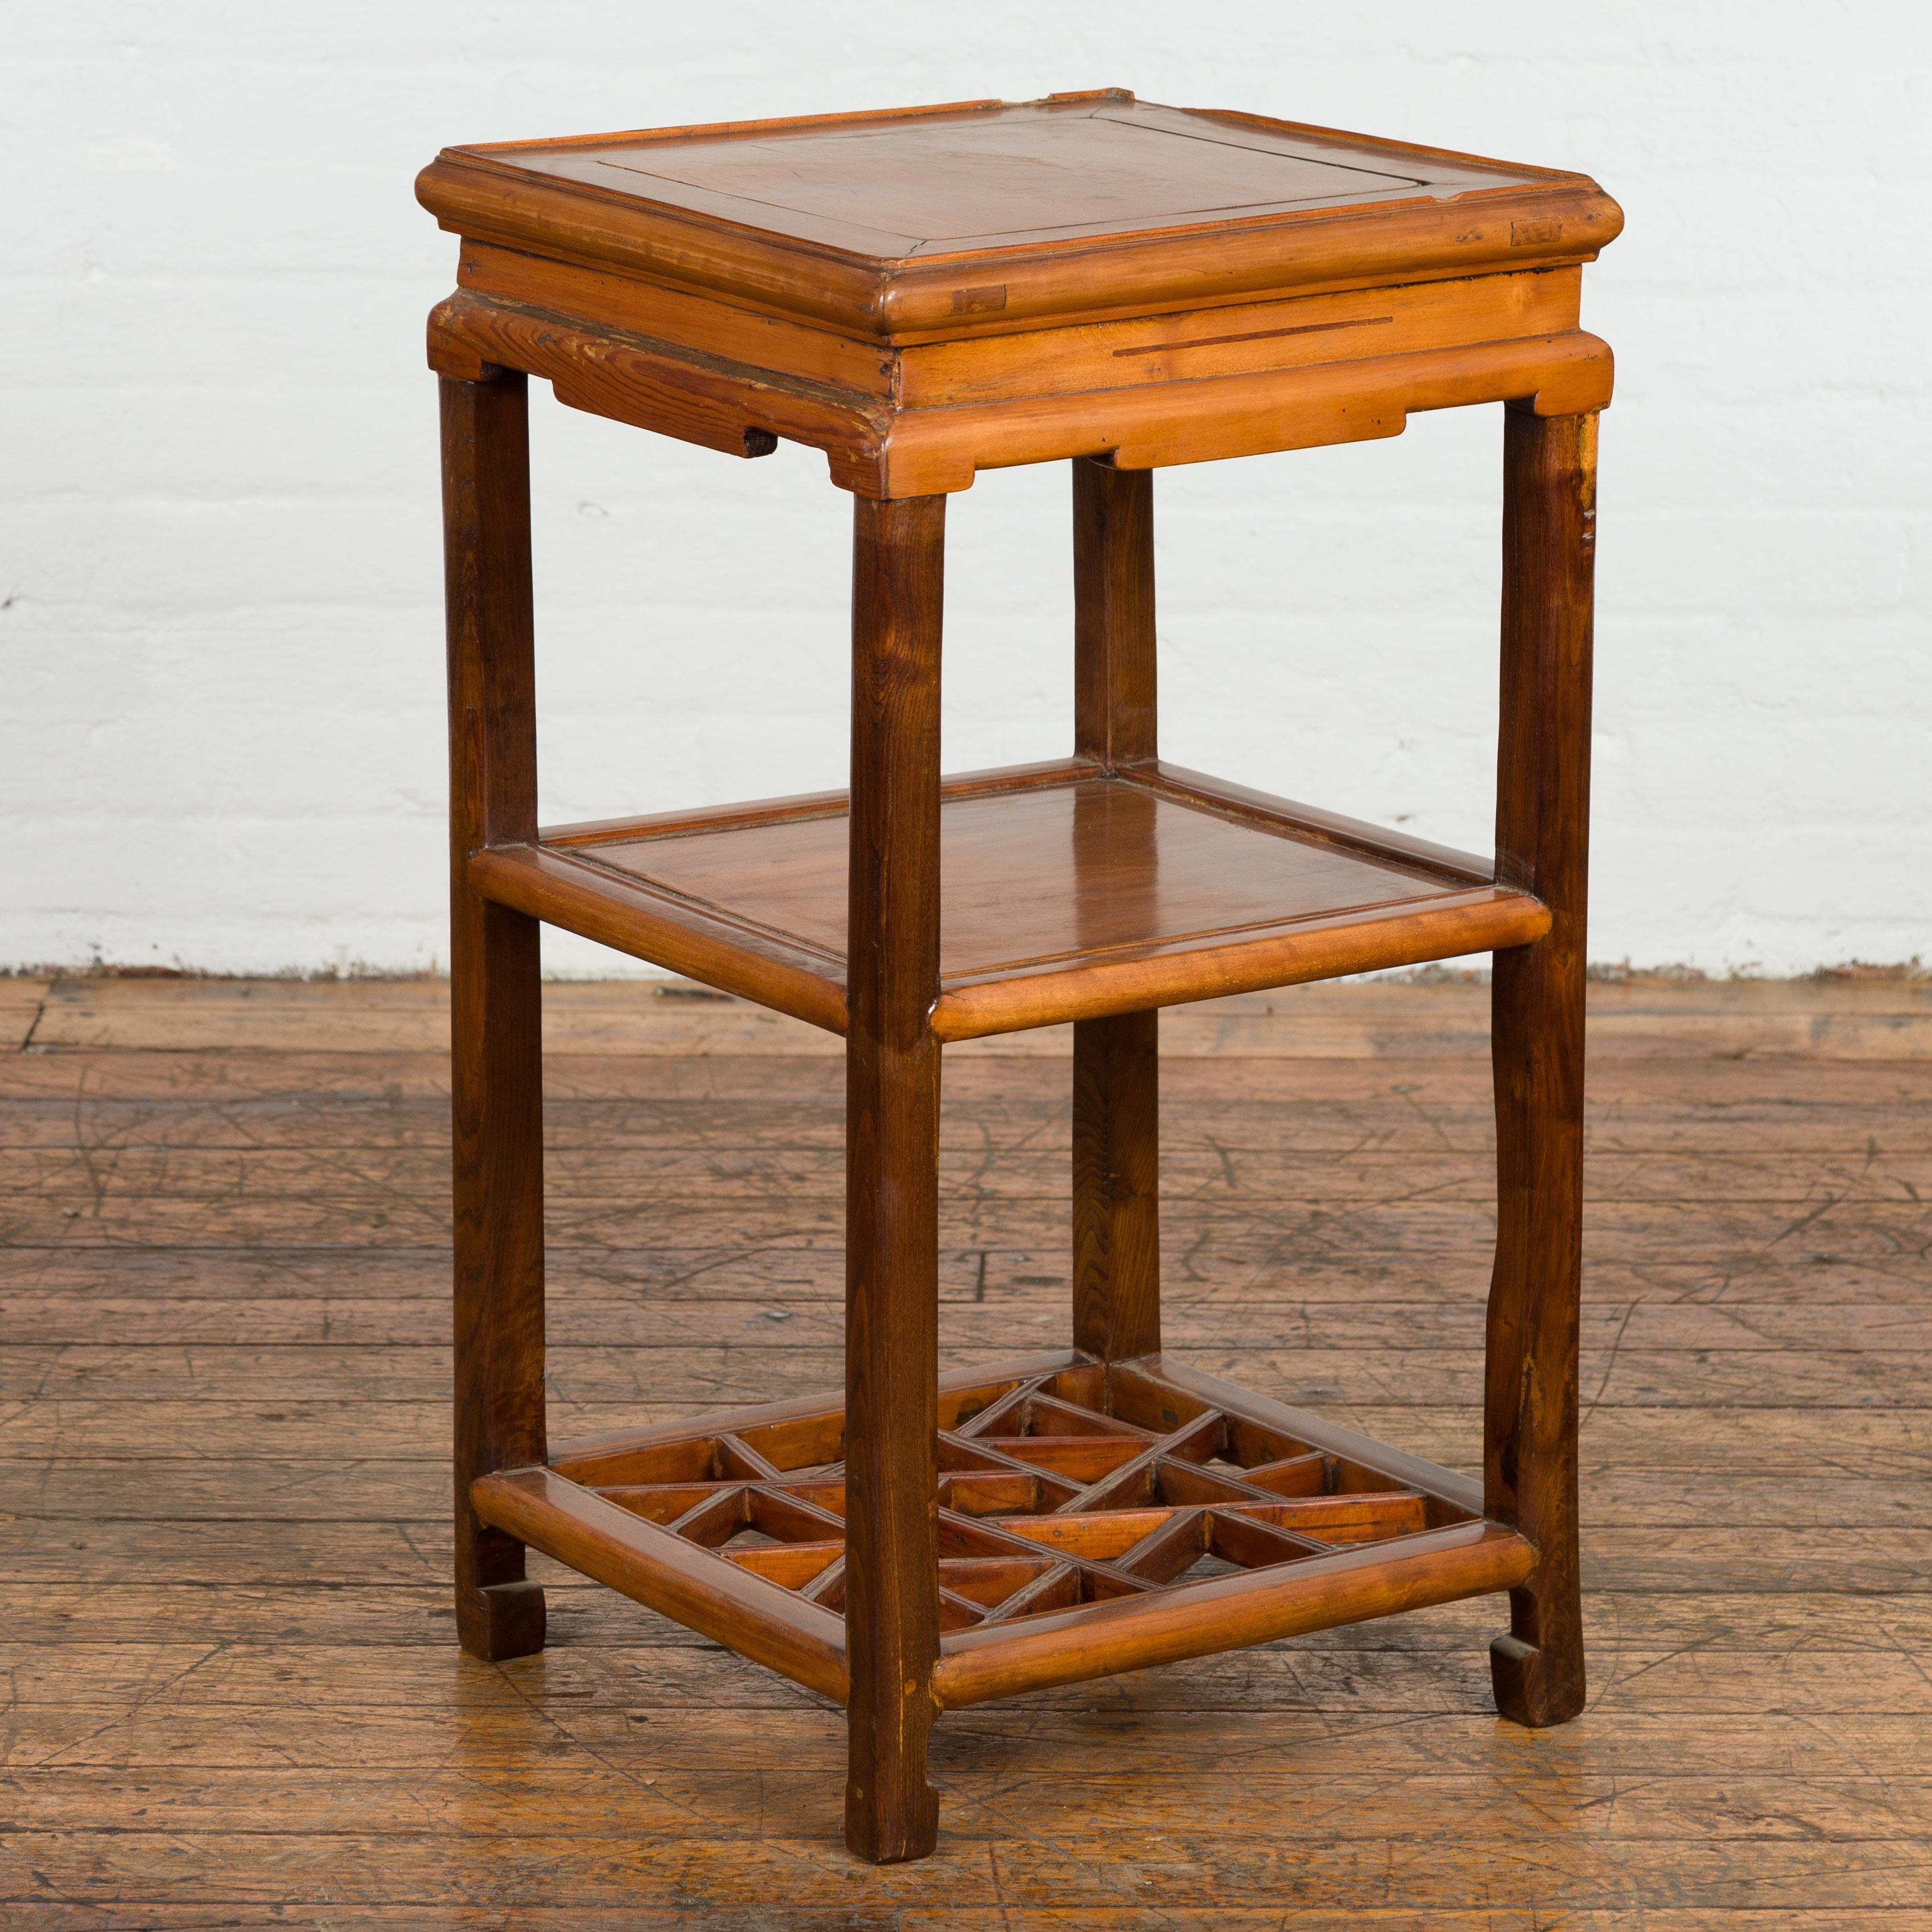 A Chinese late Qing Dynasty period lamp table from the early 20th century, with carved apron, shelves, cracked ice patterns and horse hoof feet. Created in China during the late Qing Dynasty period in the early years of the 20th century, this lamp